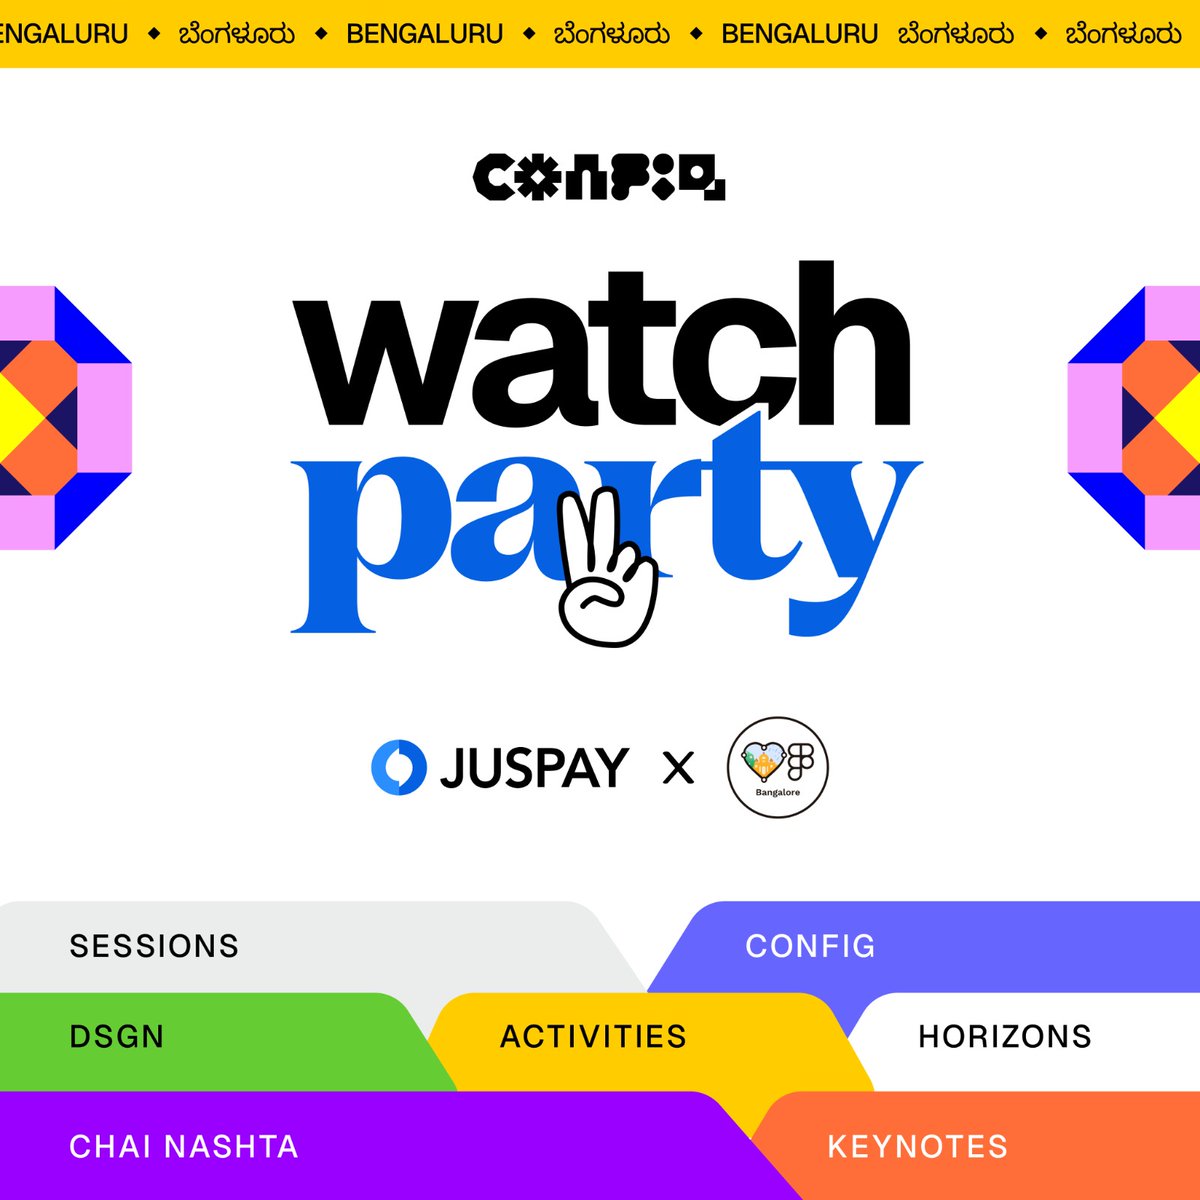 🌟 Hey there, Figma fam! 🚀

Get ready to turn your creativity up to 11 because JUSPAY is throwing the ultimate Figma Config watch party! 🎉

Stay tuned for venue details and how to secure your spot! 🌅

#design #figma #config #figmadesign #watchparty #bangalore